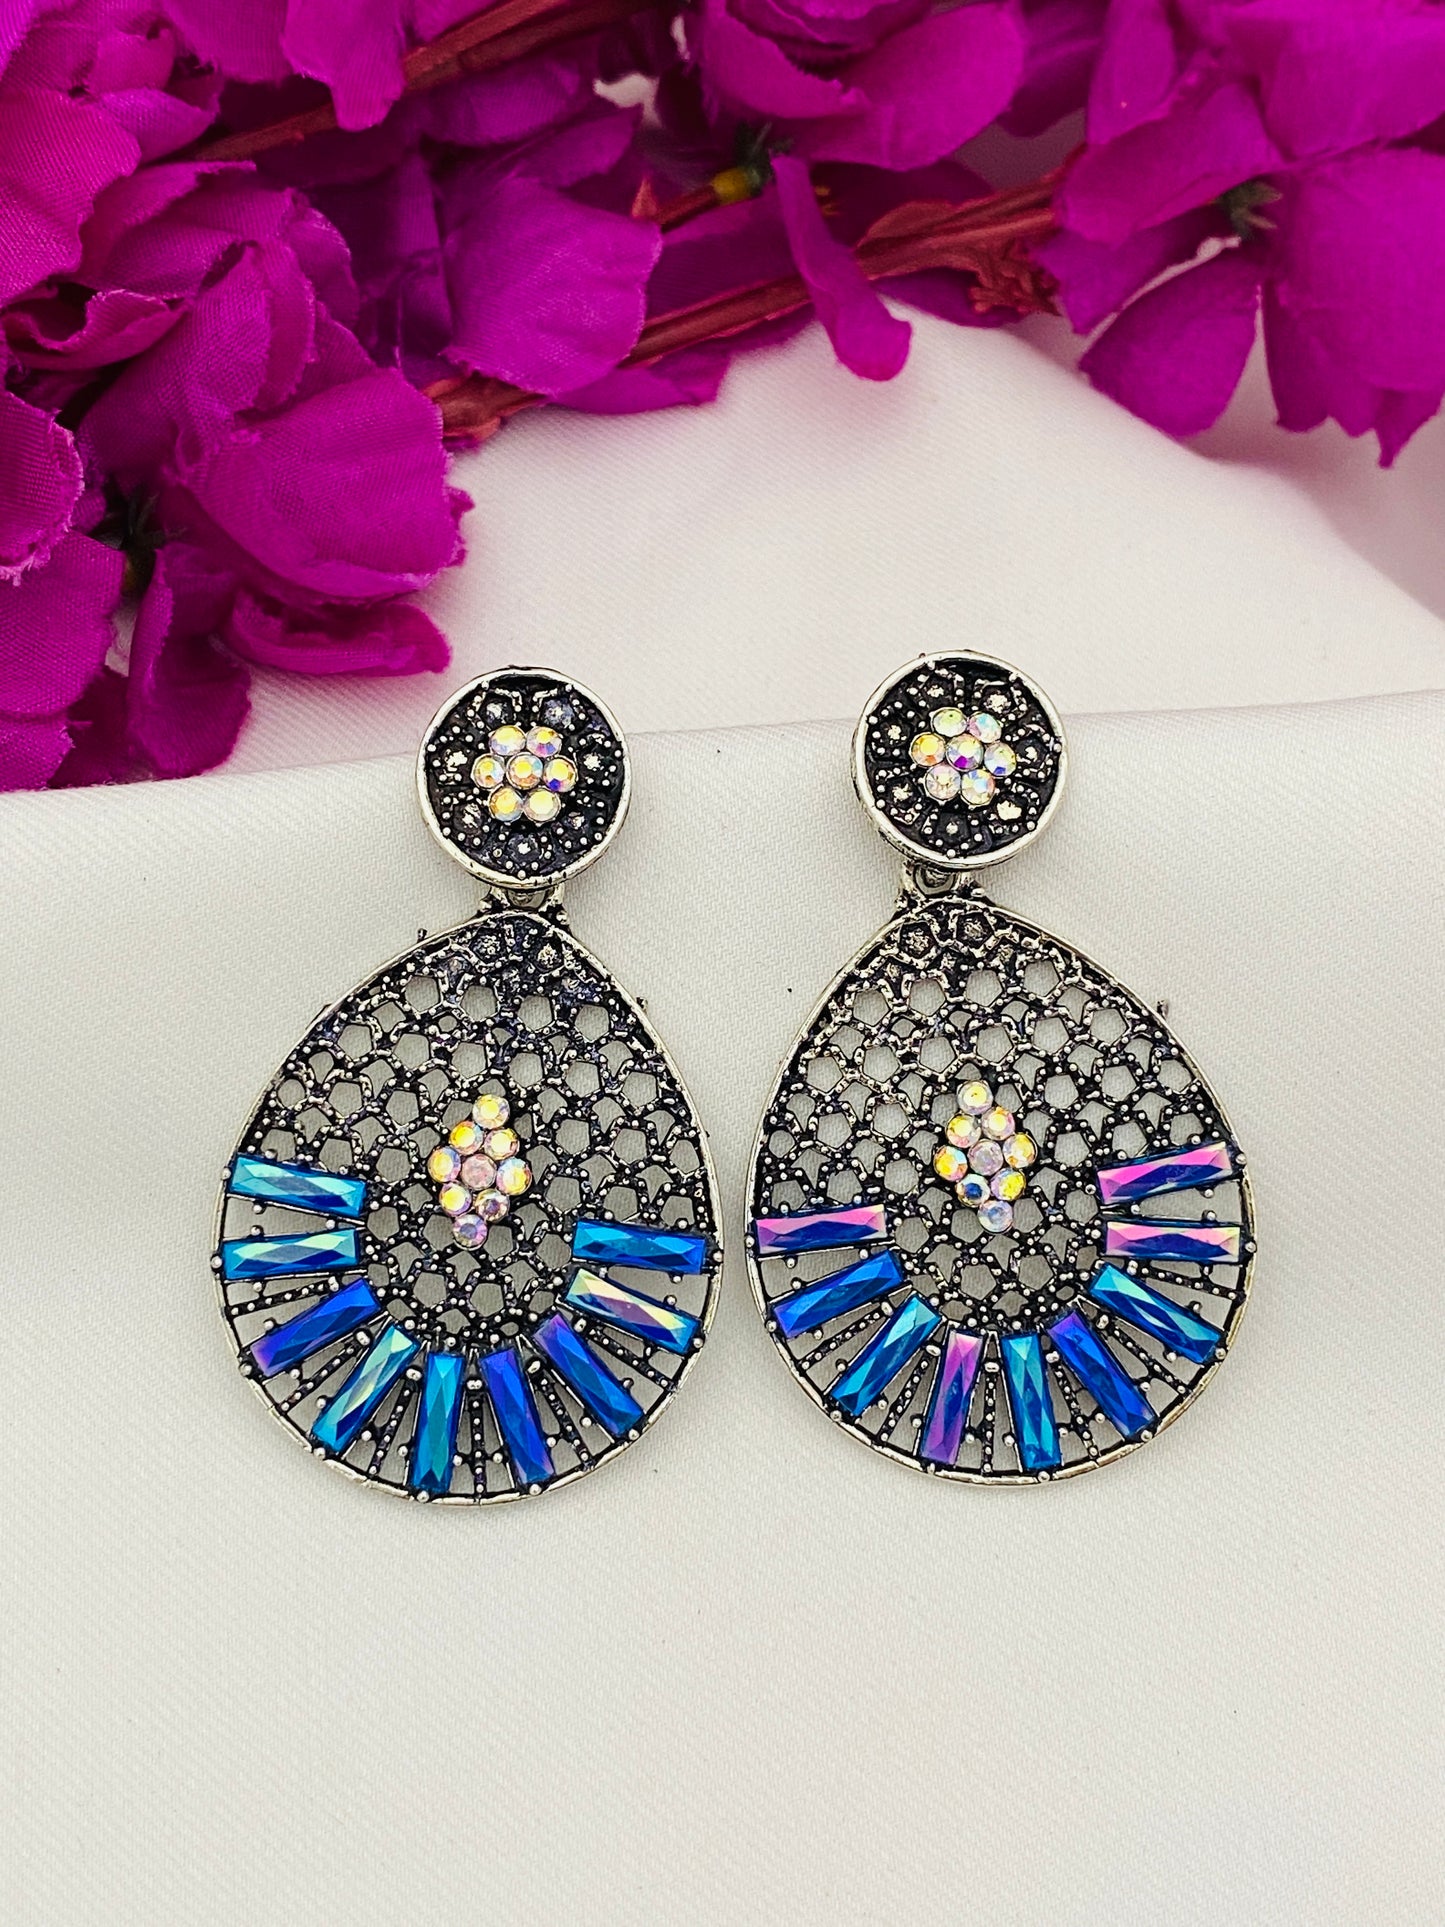 Marvelous Multicolor Oxidized Earrings With White Stones